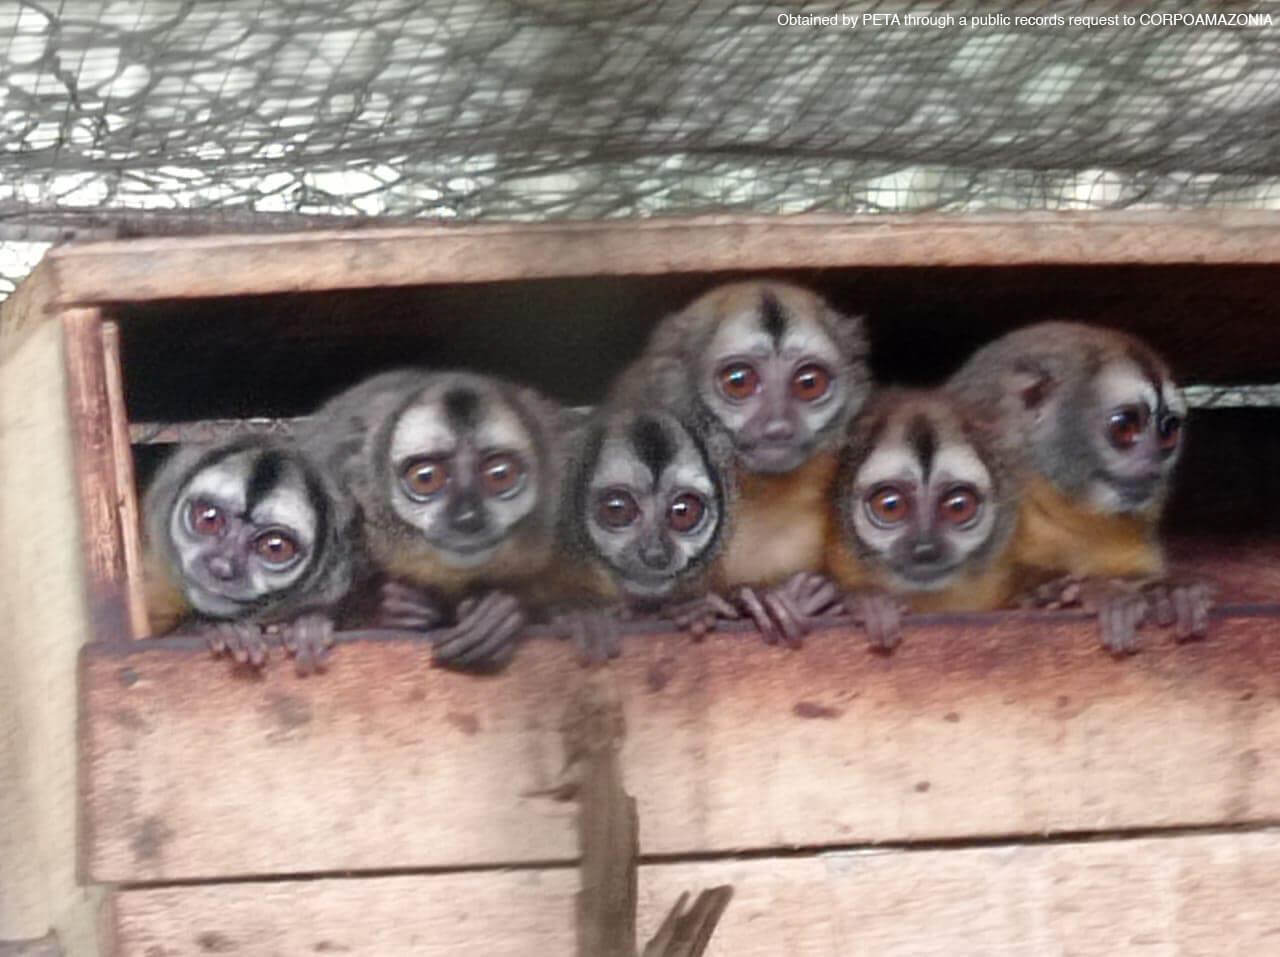 A group of monkeys peer from a box